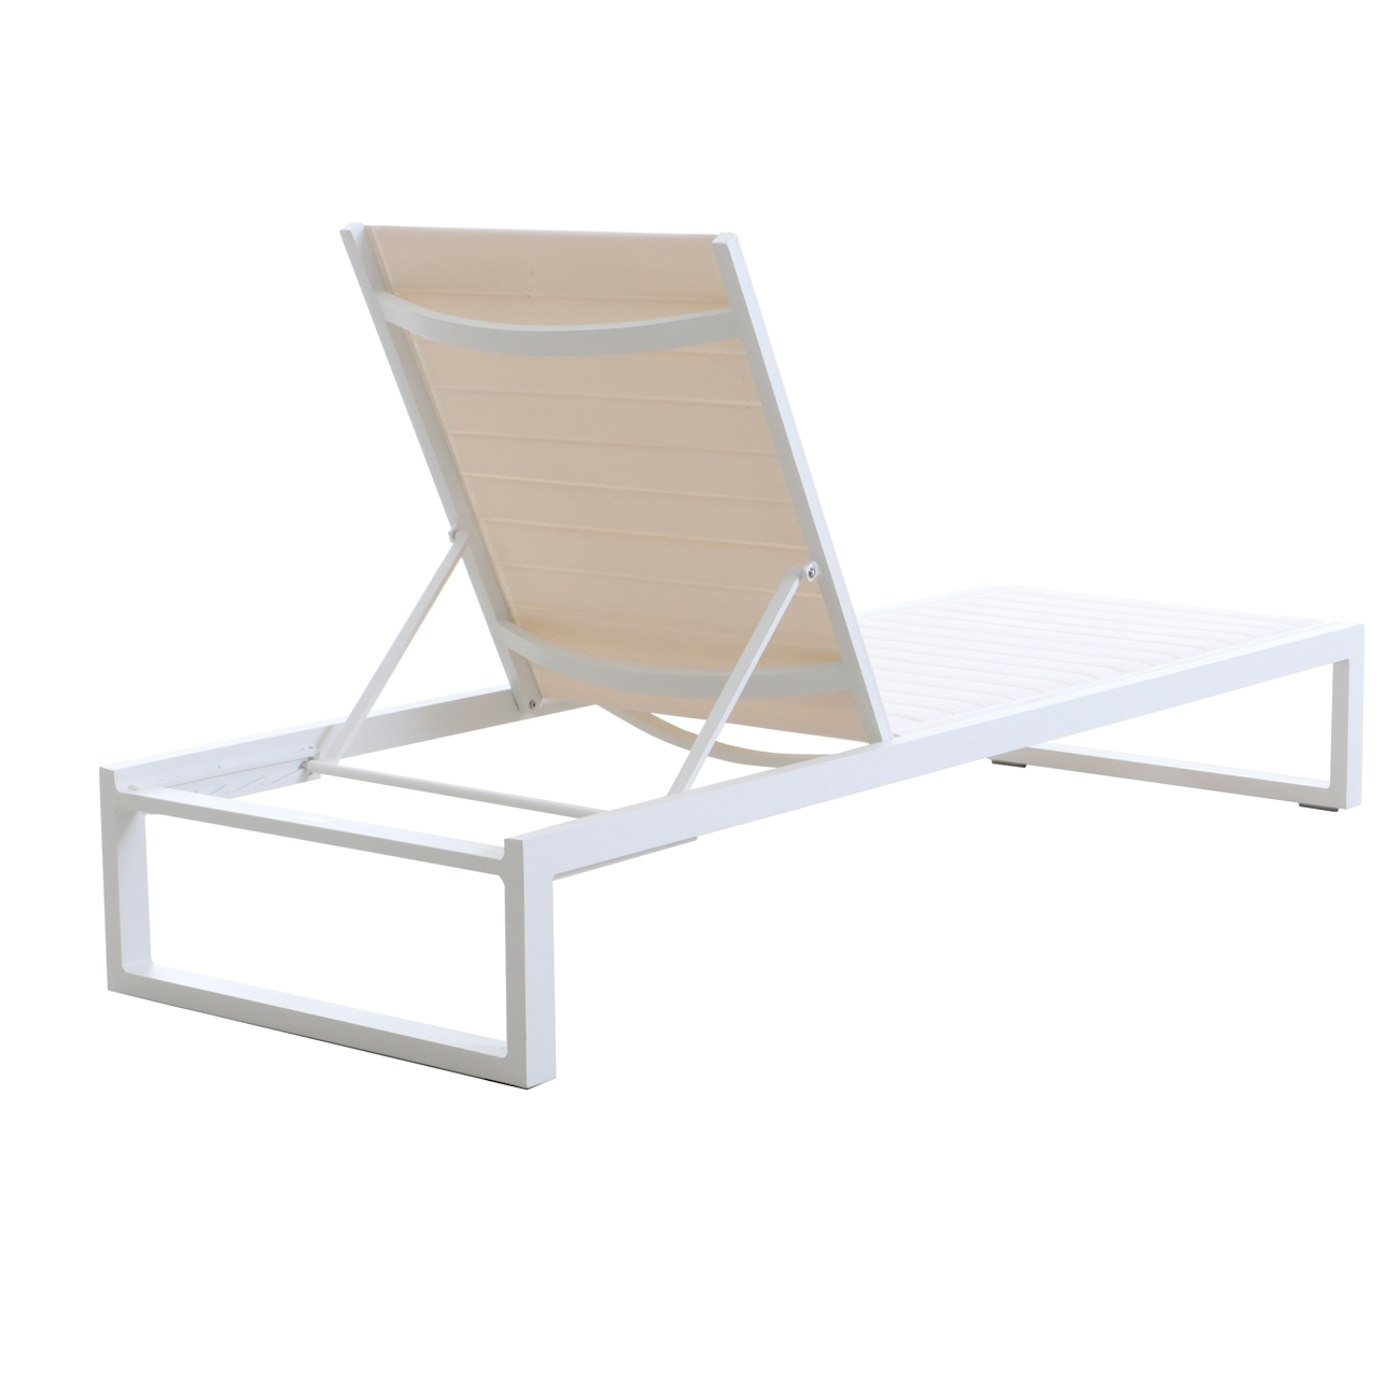 Case by Matthew Hilton "Eos" Chaise Patio Lounge Chairs in White | EBTH